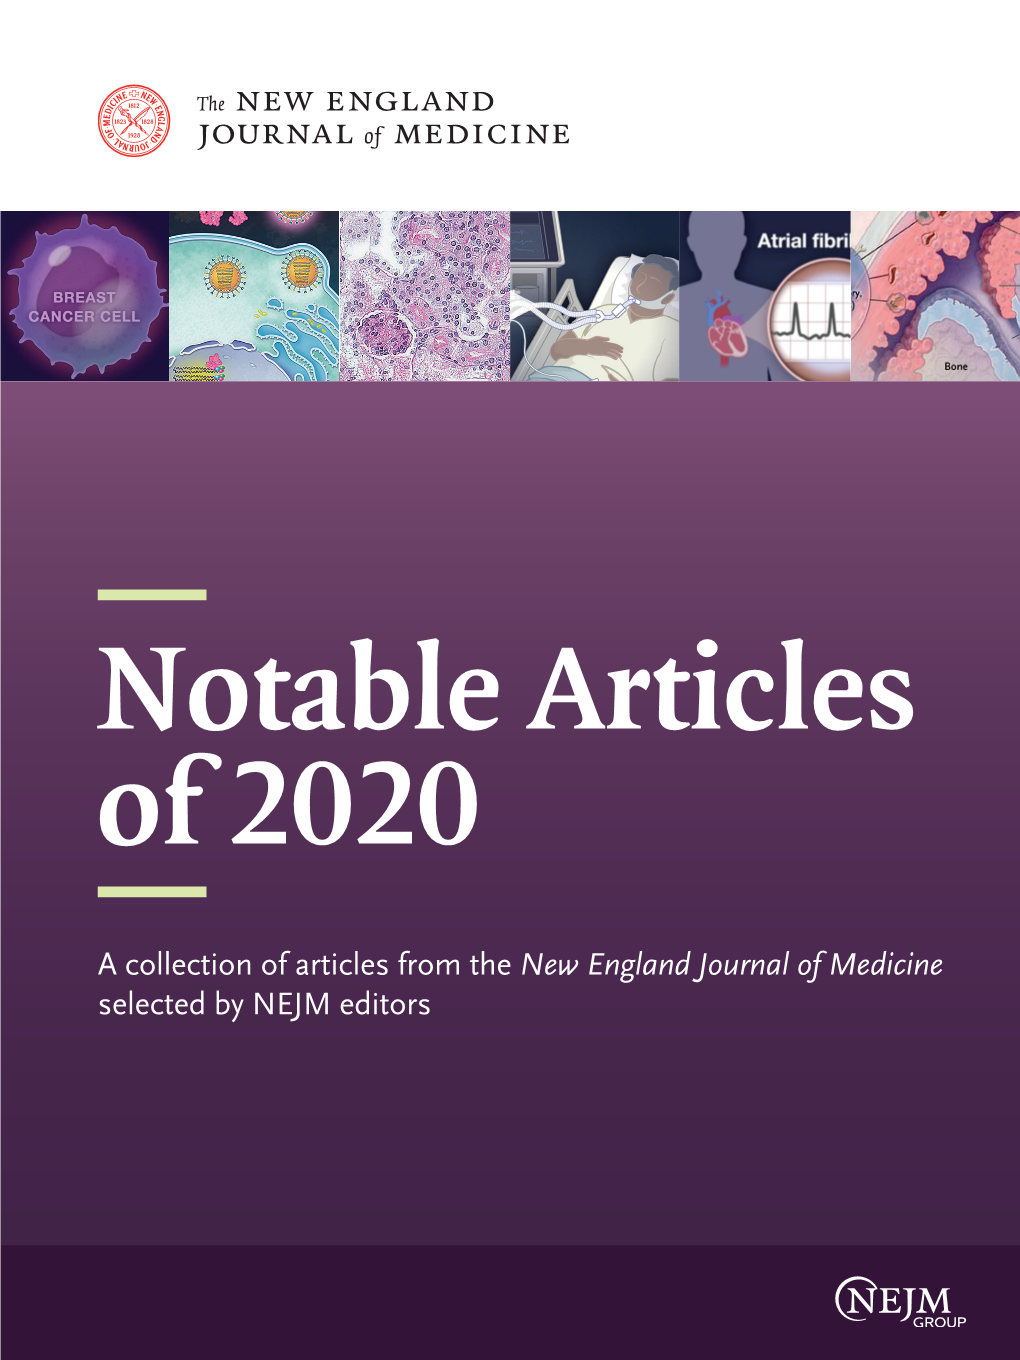 A Collection of Articles from the New England Journal of Medicine